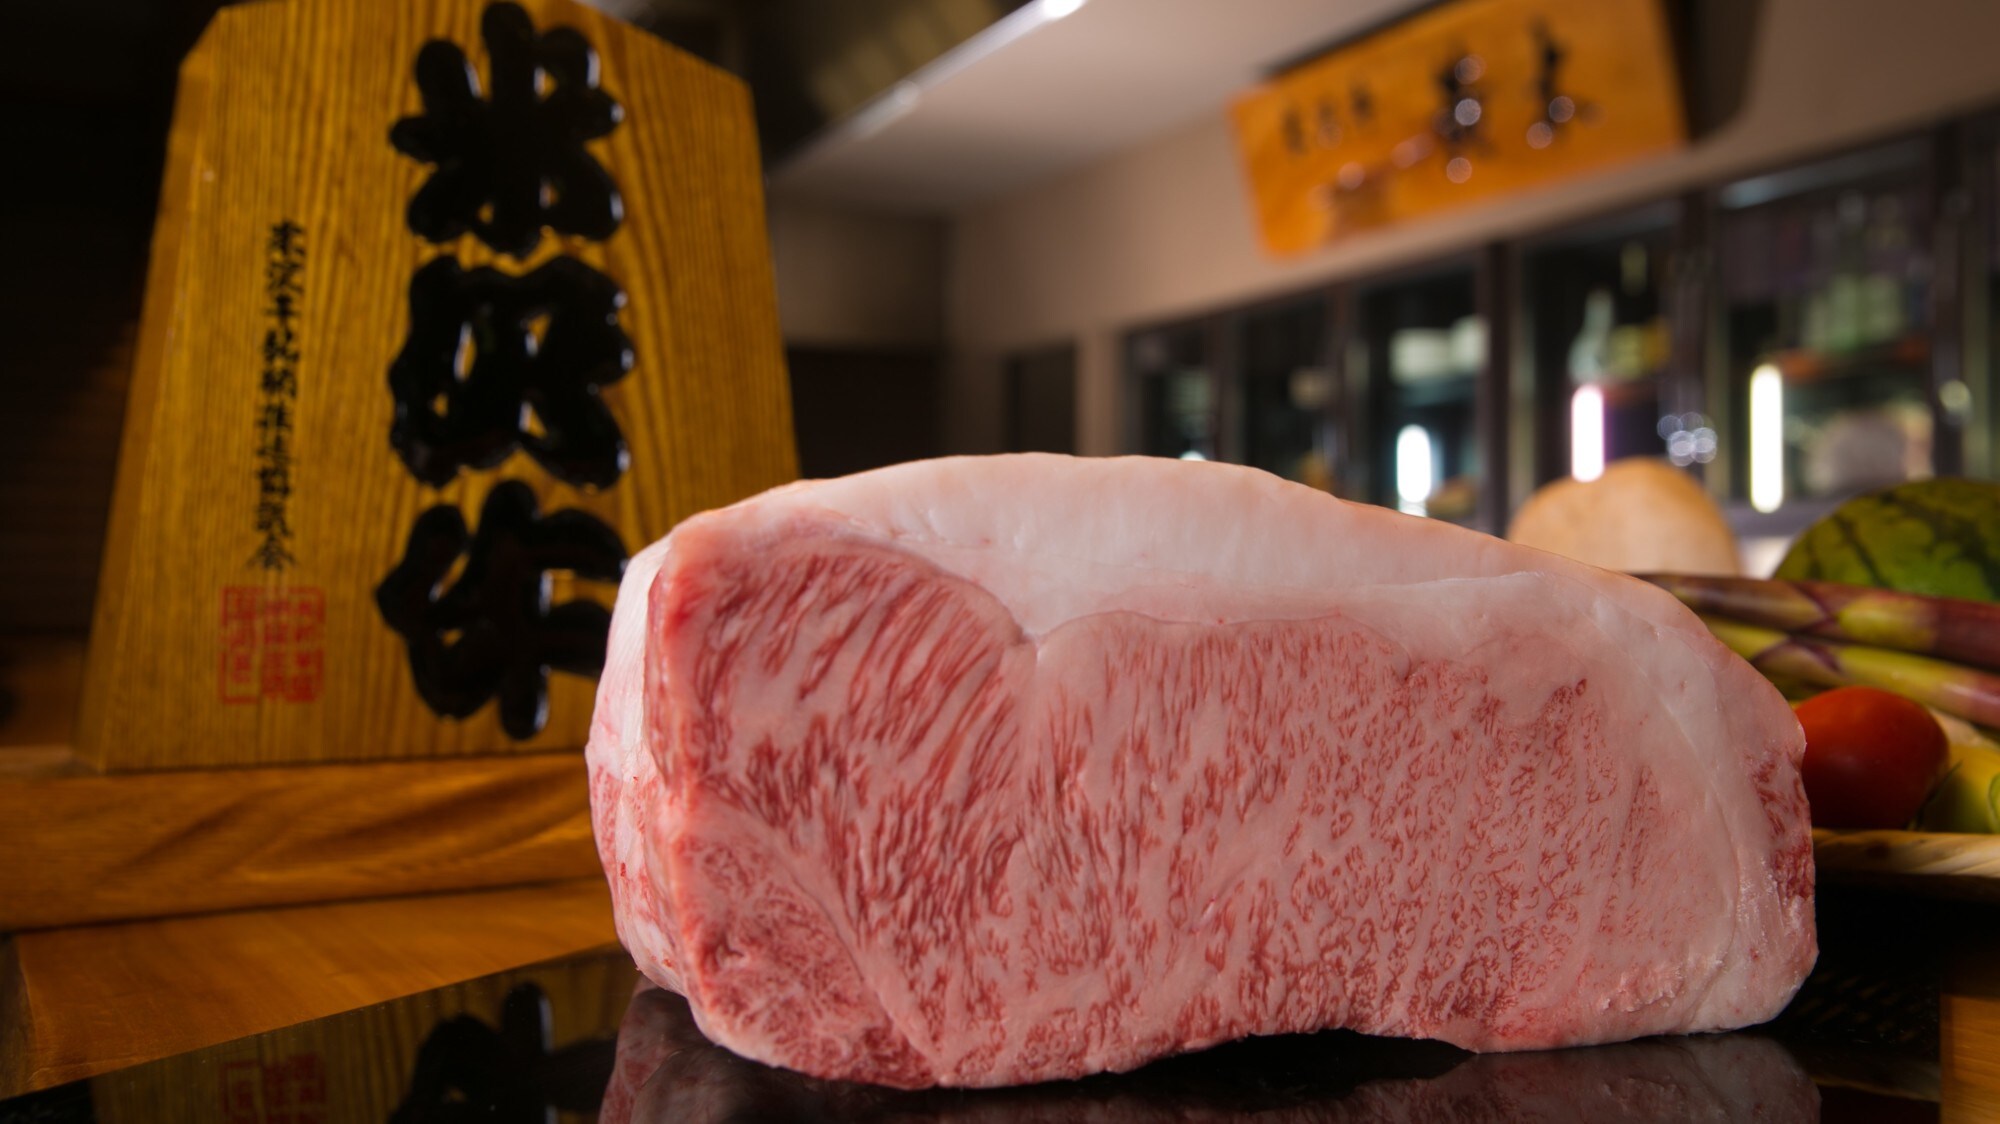 Yonezawa beef example / We prepare high quality meat unique to the sister building of a long-established butcher shop